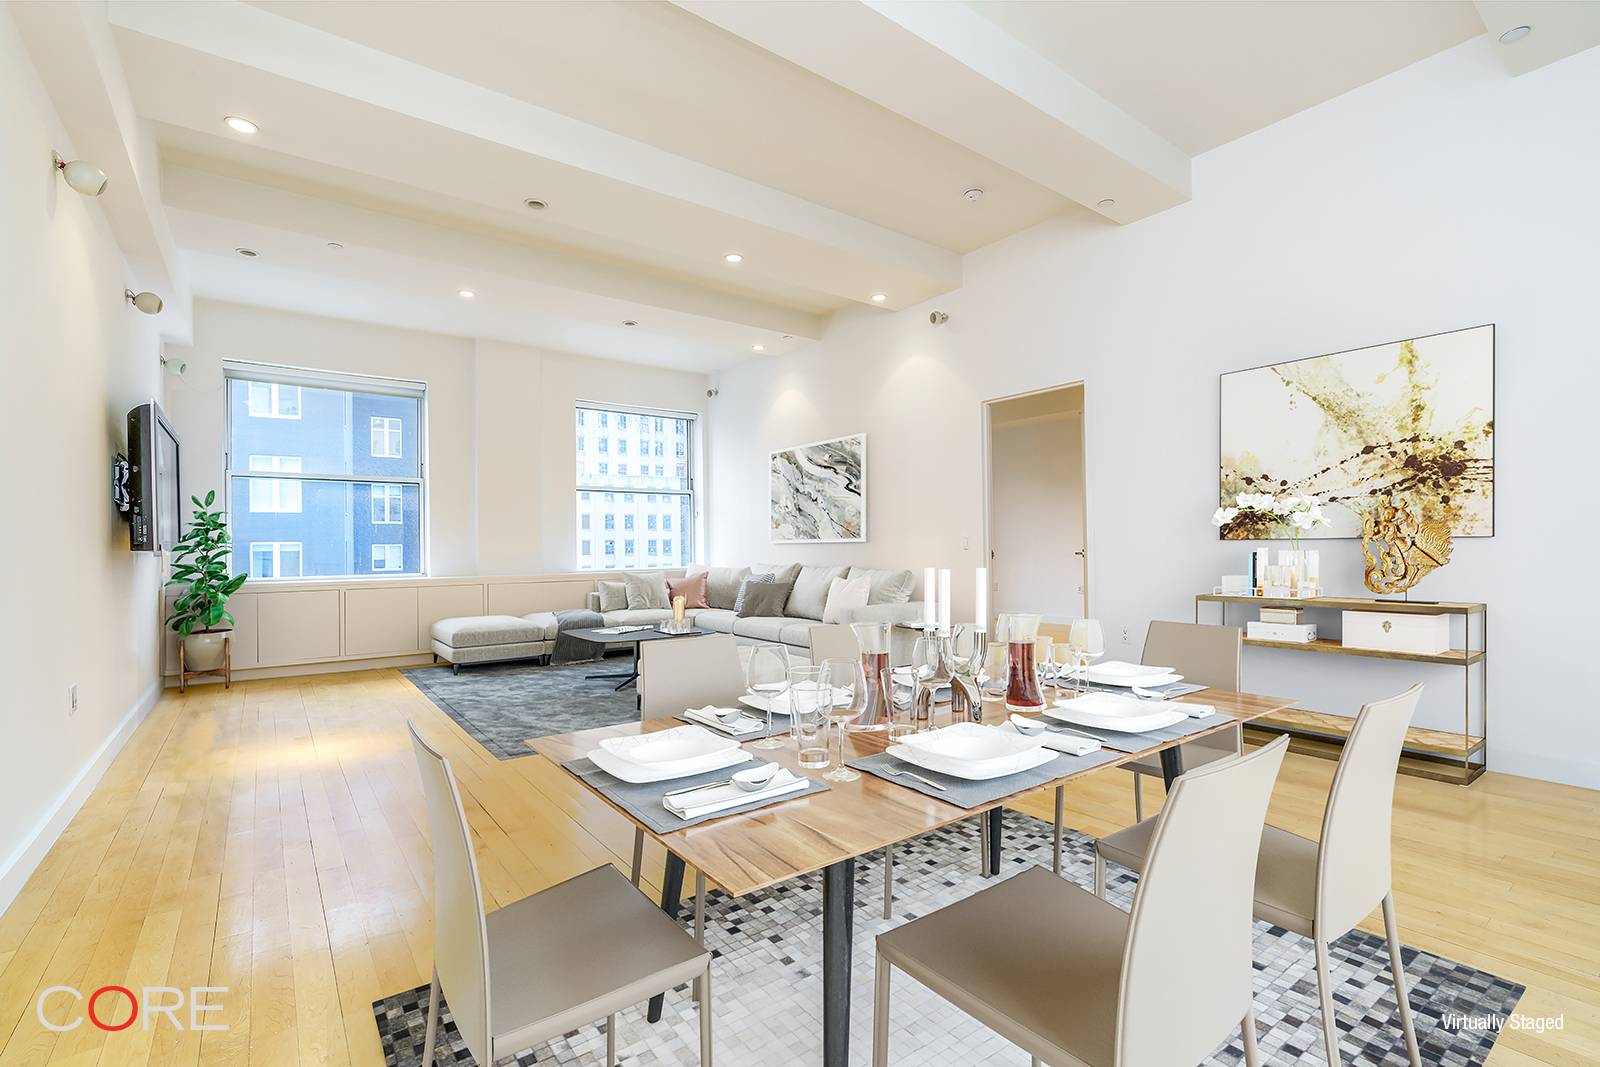 This expansive loft features one king size bedroom plus a large interior home office room, as well as a private storage unit located on the same floor.